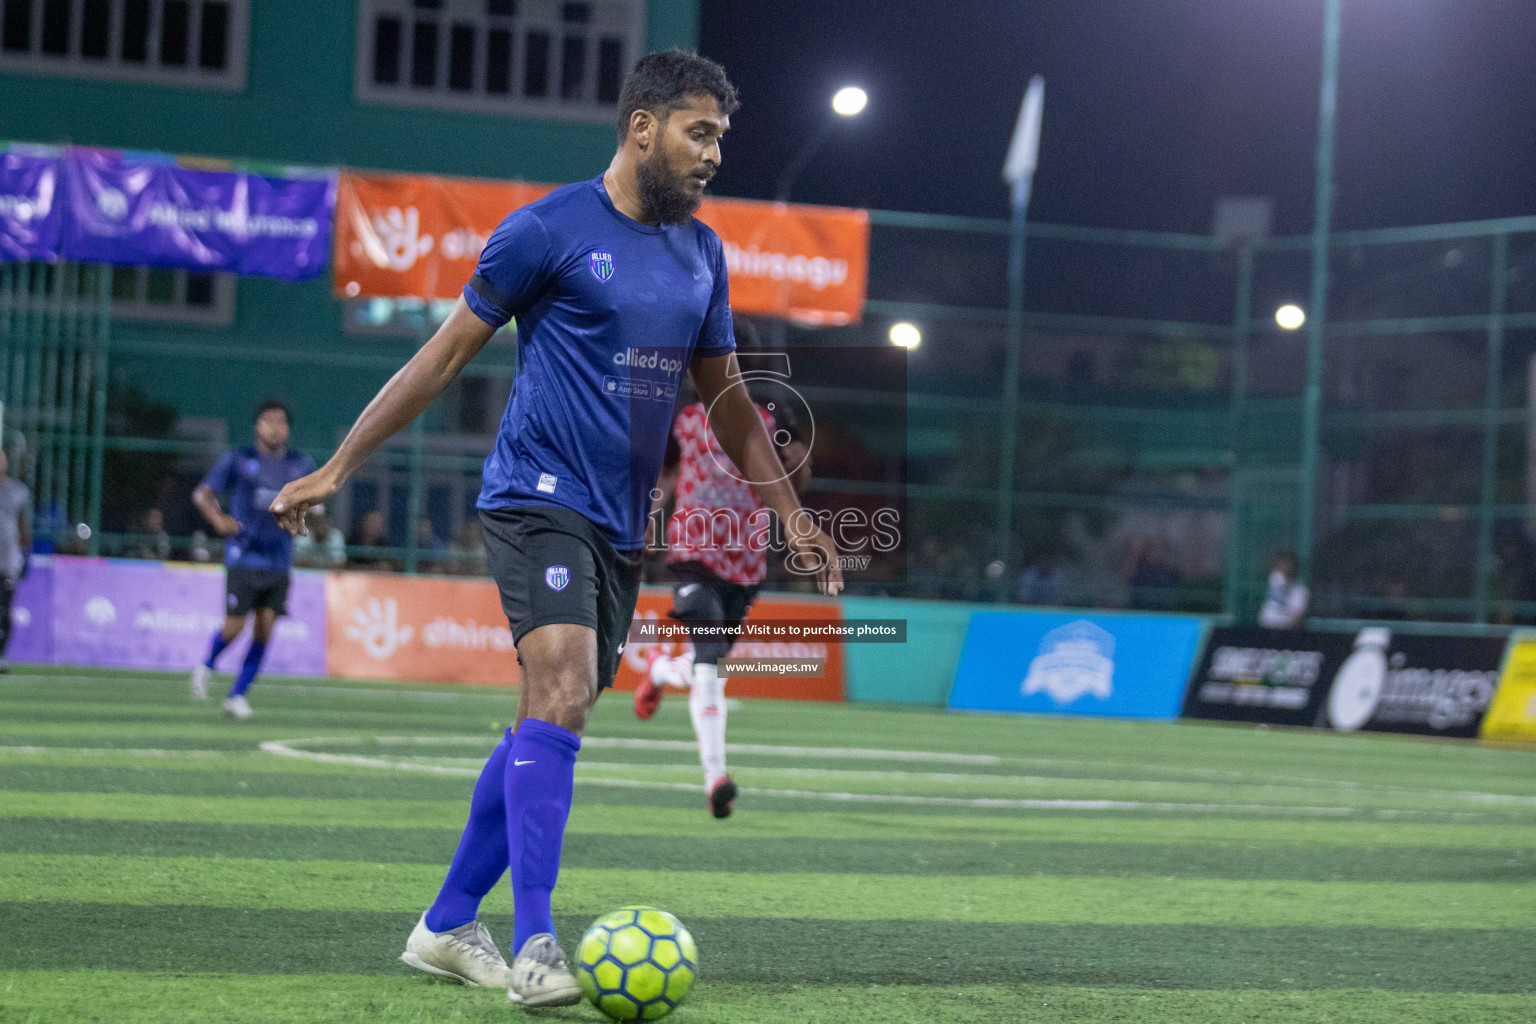 Club Maldives Day 11 in Hulhumale, Male', Maldives on 21st April 2019 Photos: Ismail Thoriq /images.mv